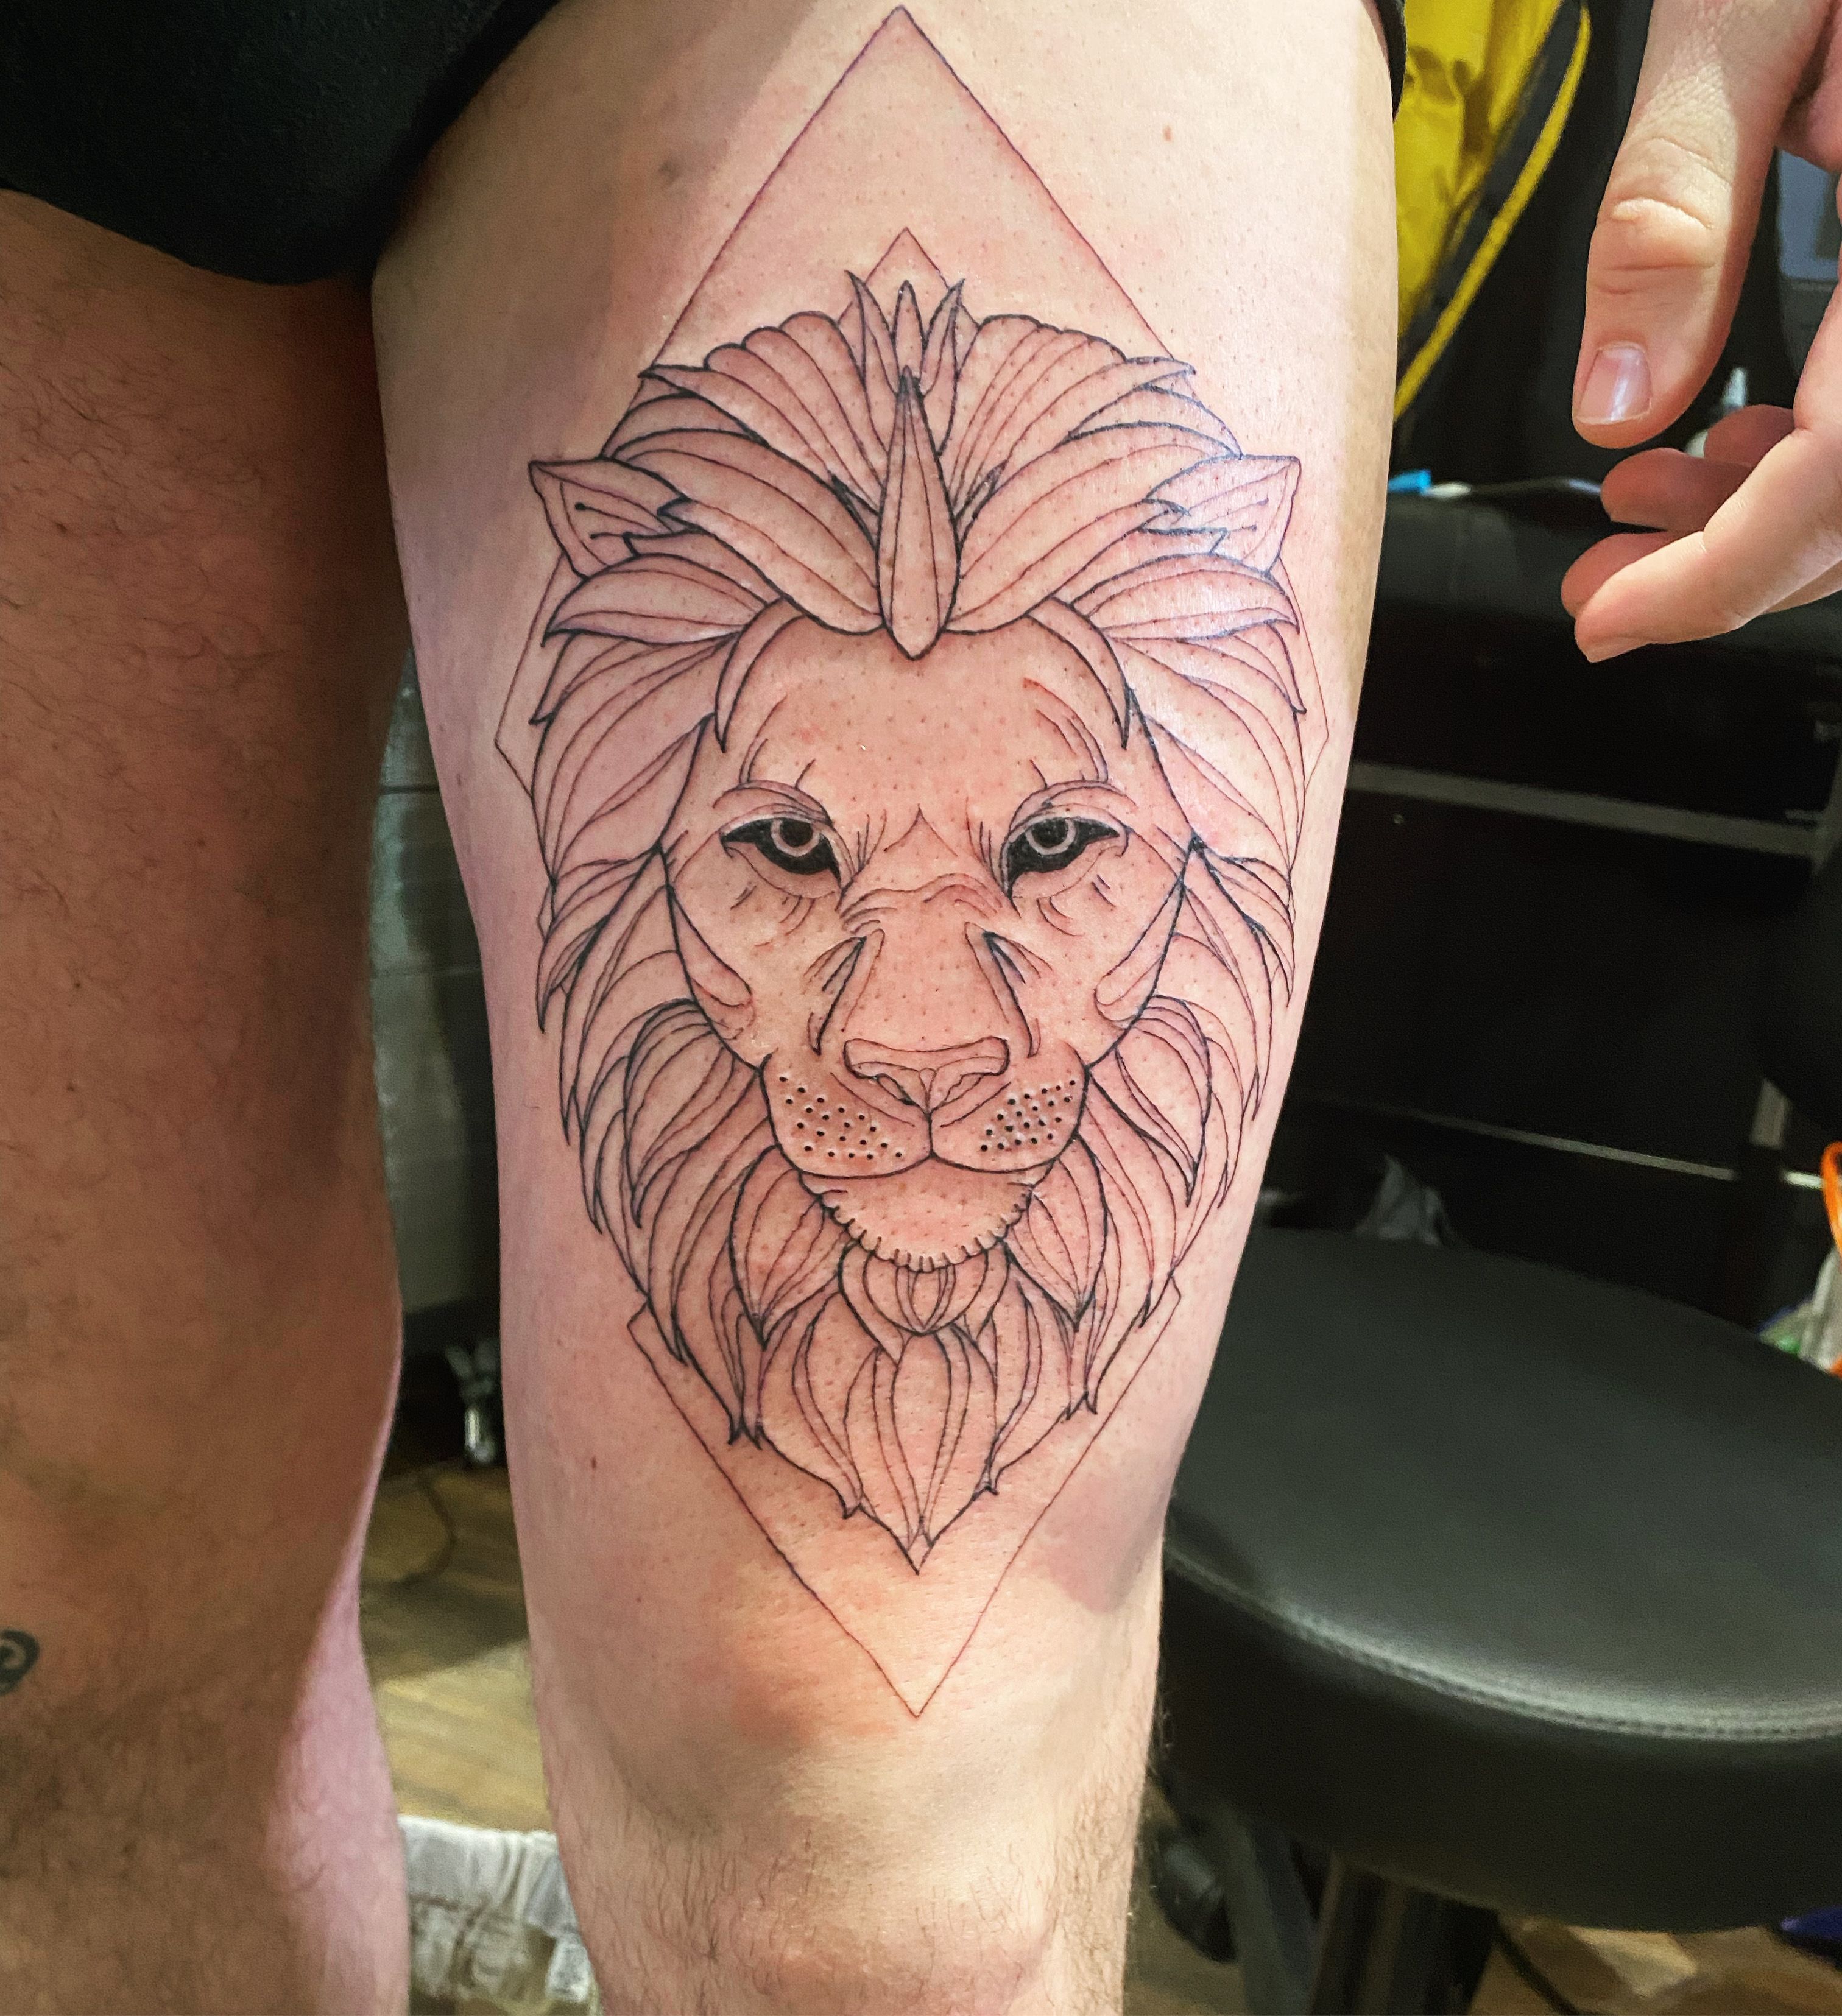 Le Lion tattoo meanings  Blendup Tattoos